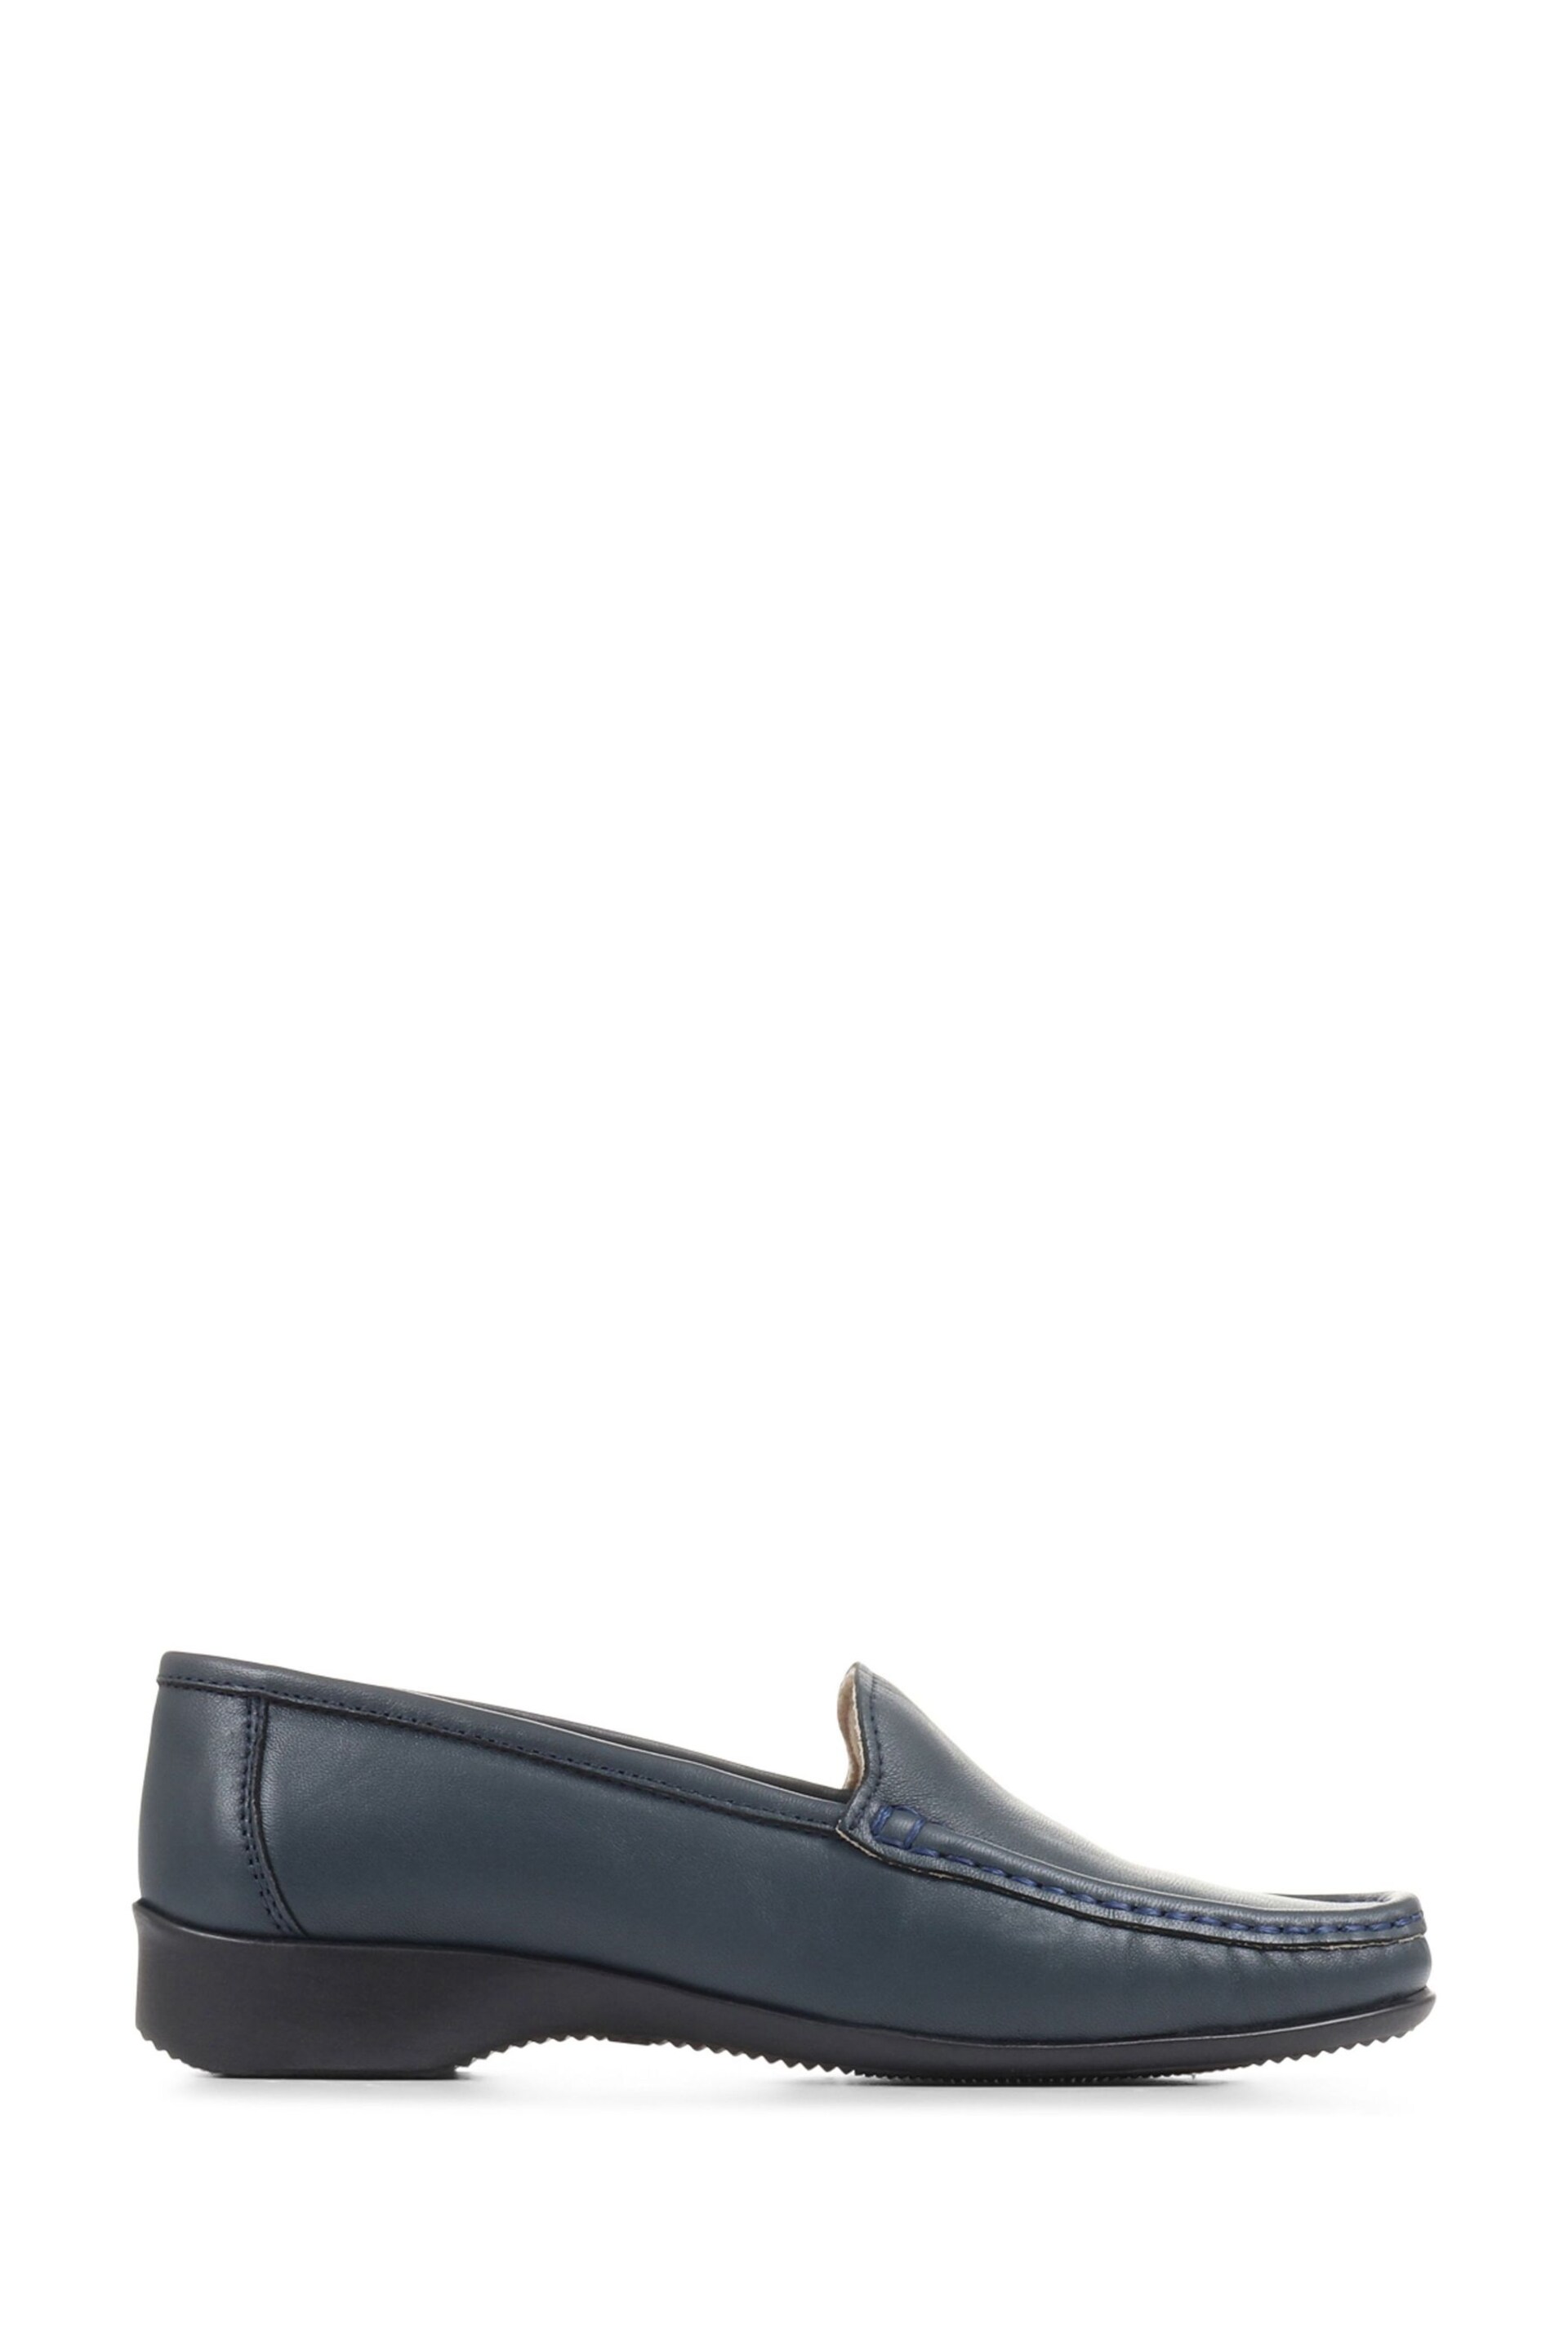 Pavers Blue Wide Fit Leather Loafers - Image 1 of 5